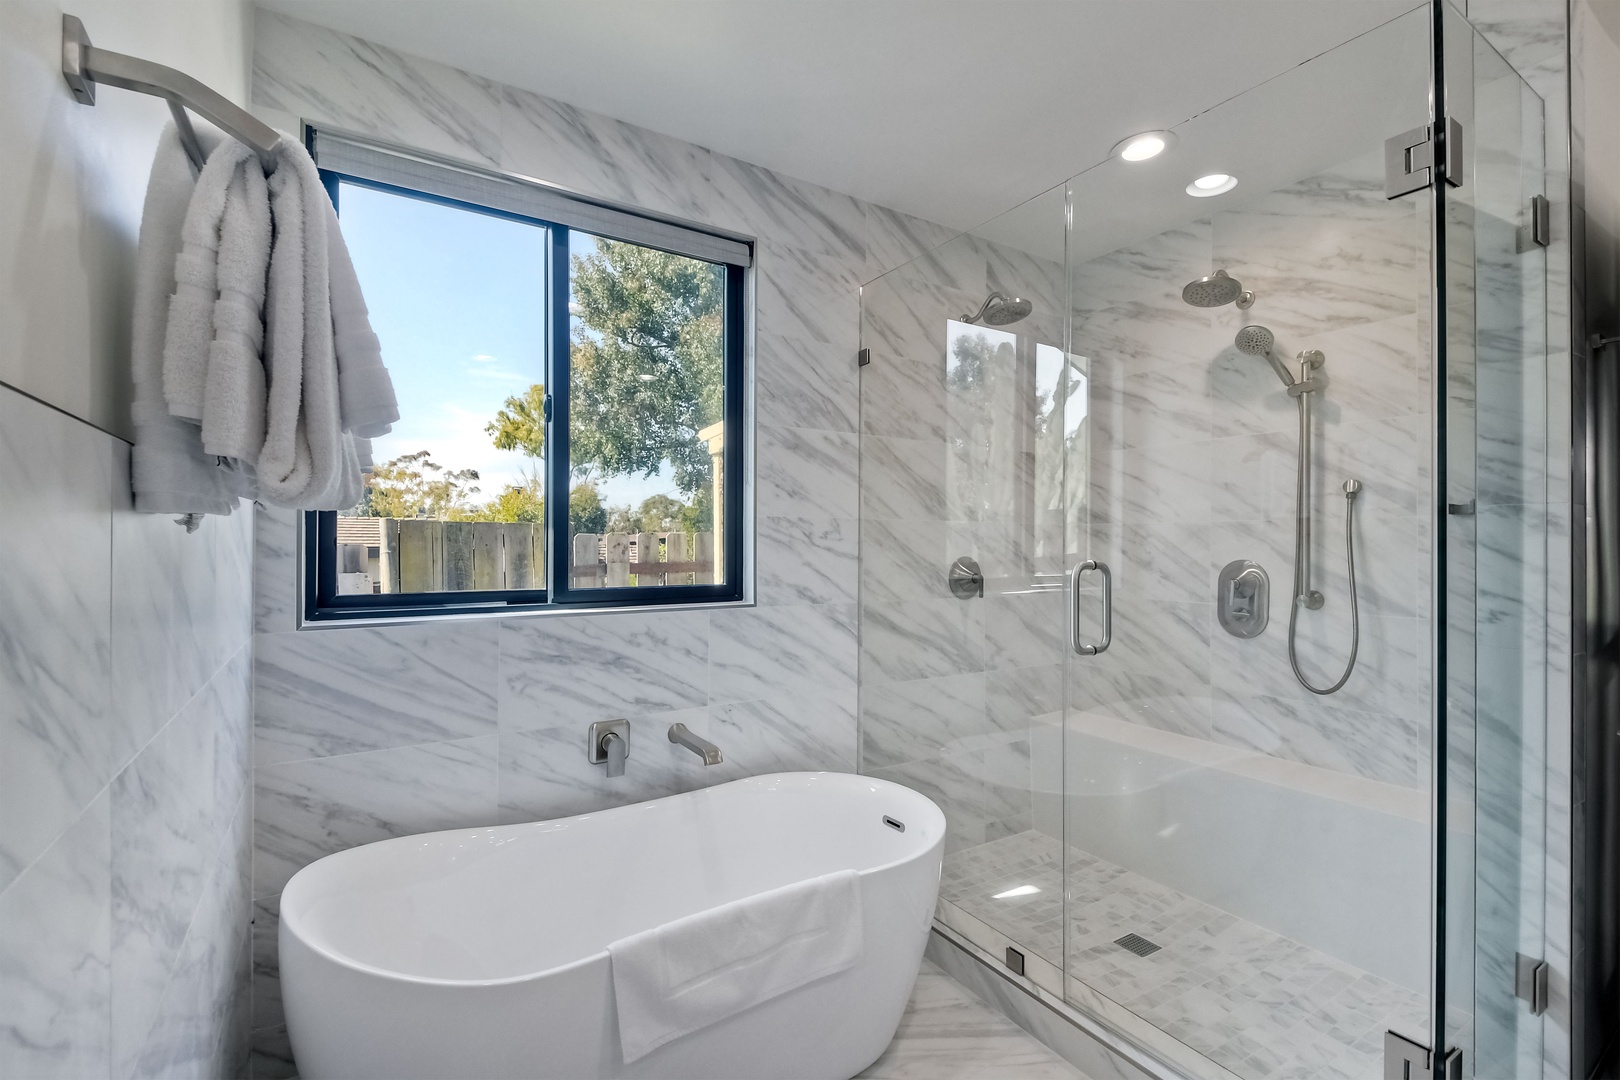 The master ensuite features a large vanity, glass shower, & luxe soaking tub